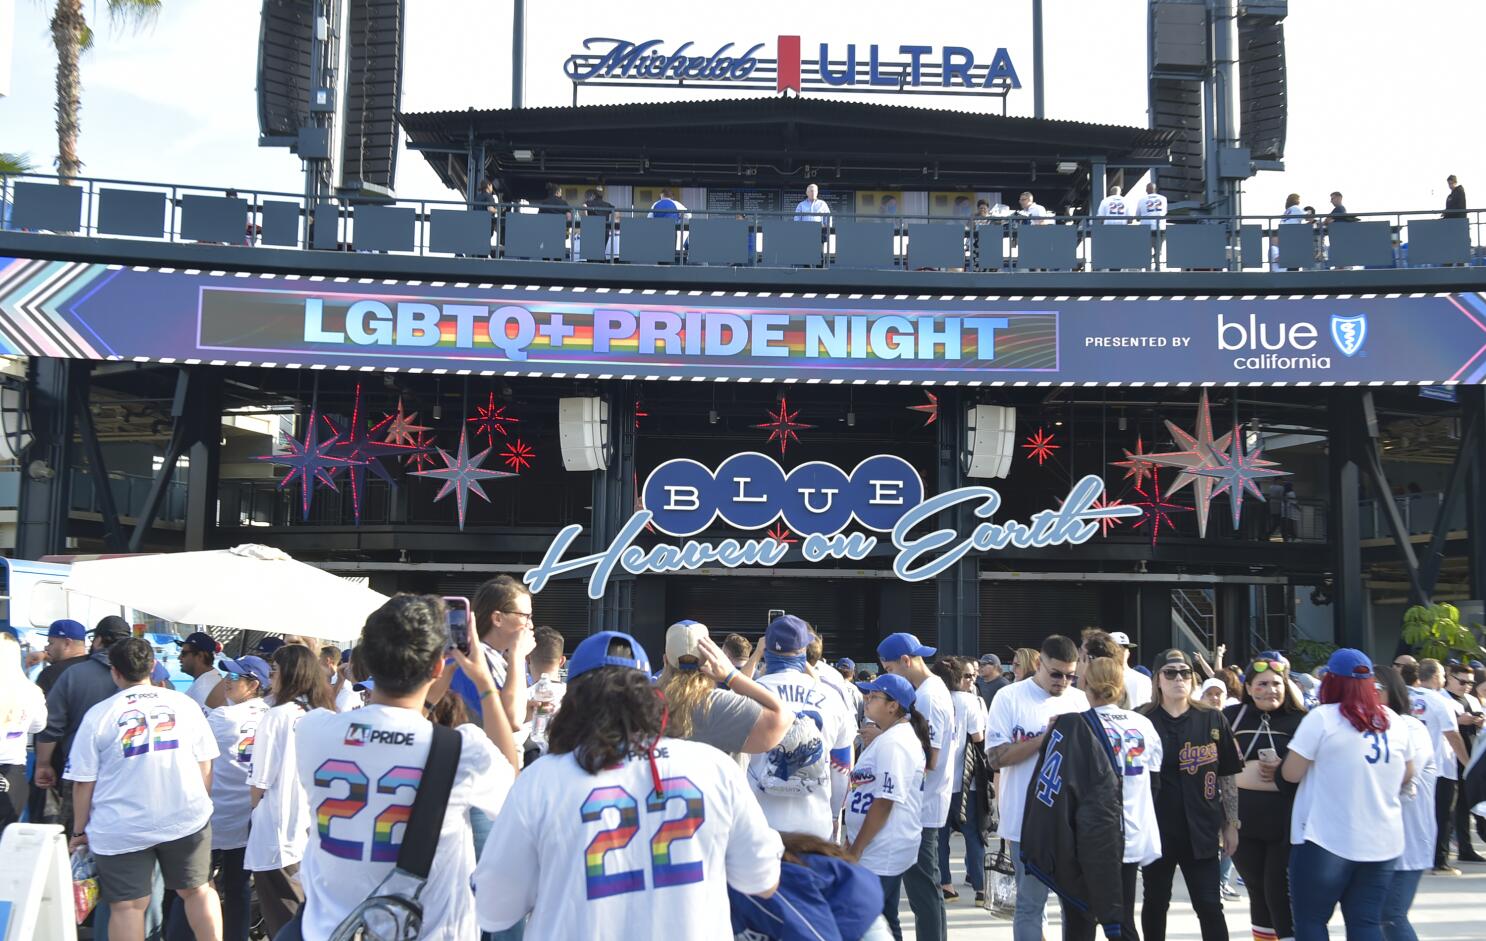 Dodgers' biggest Pride Night to date include variations on outfield signage